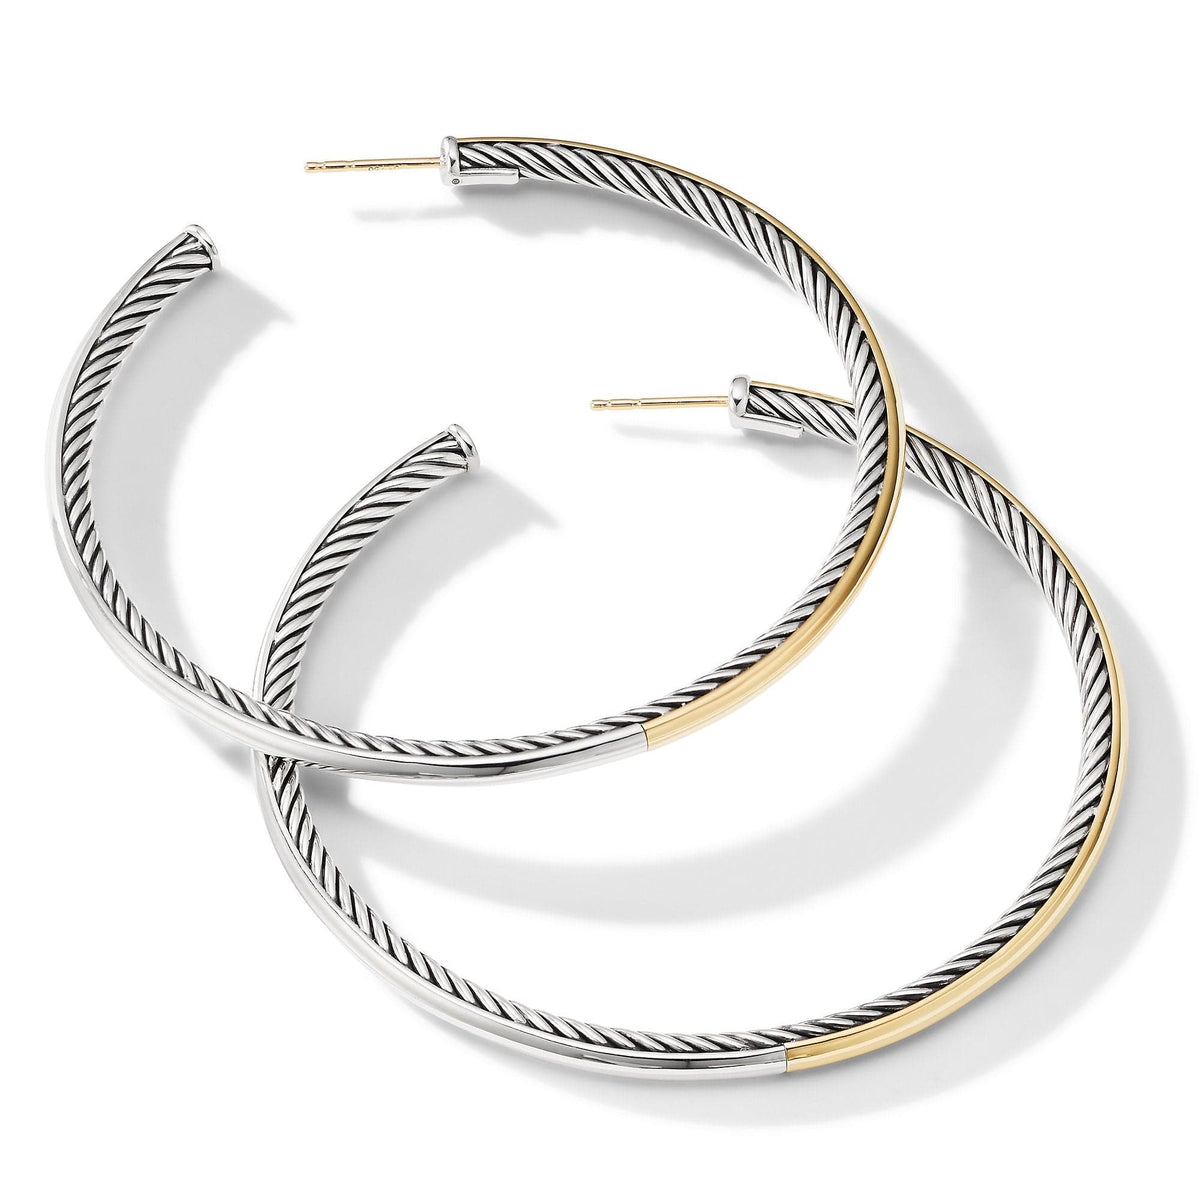 Sculpted Cable Hoop Earrings with 18K Yellow Gold